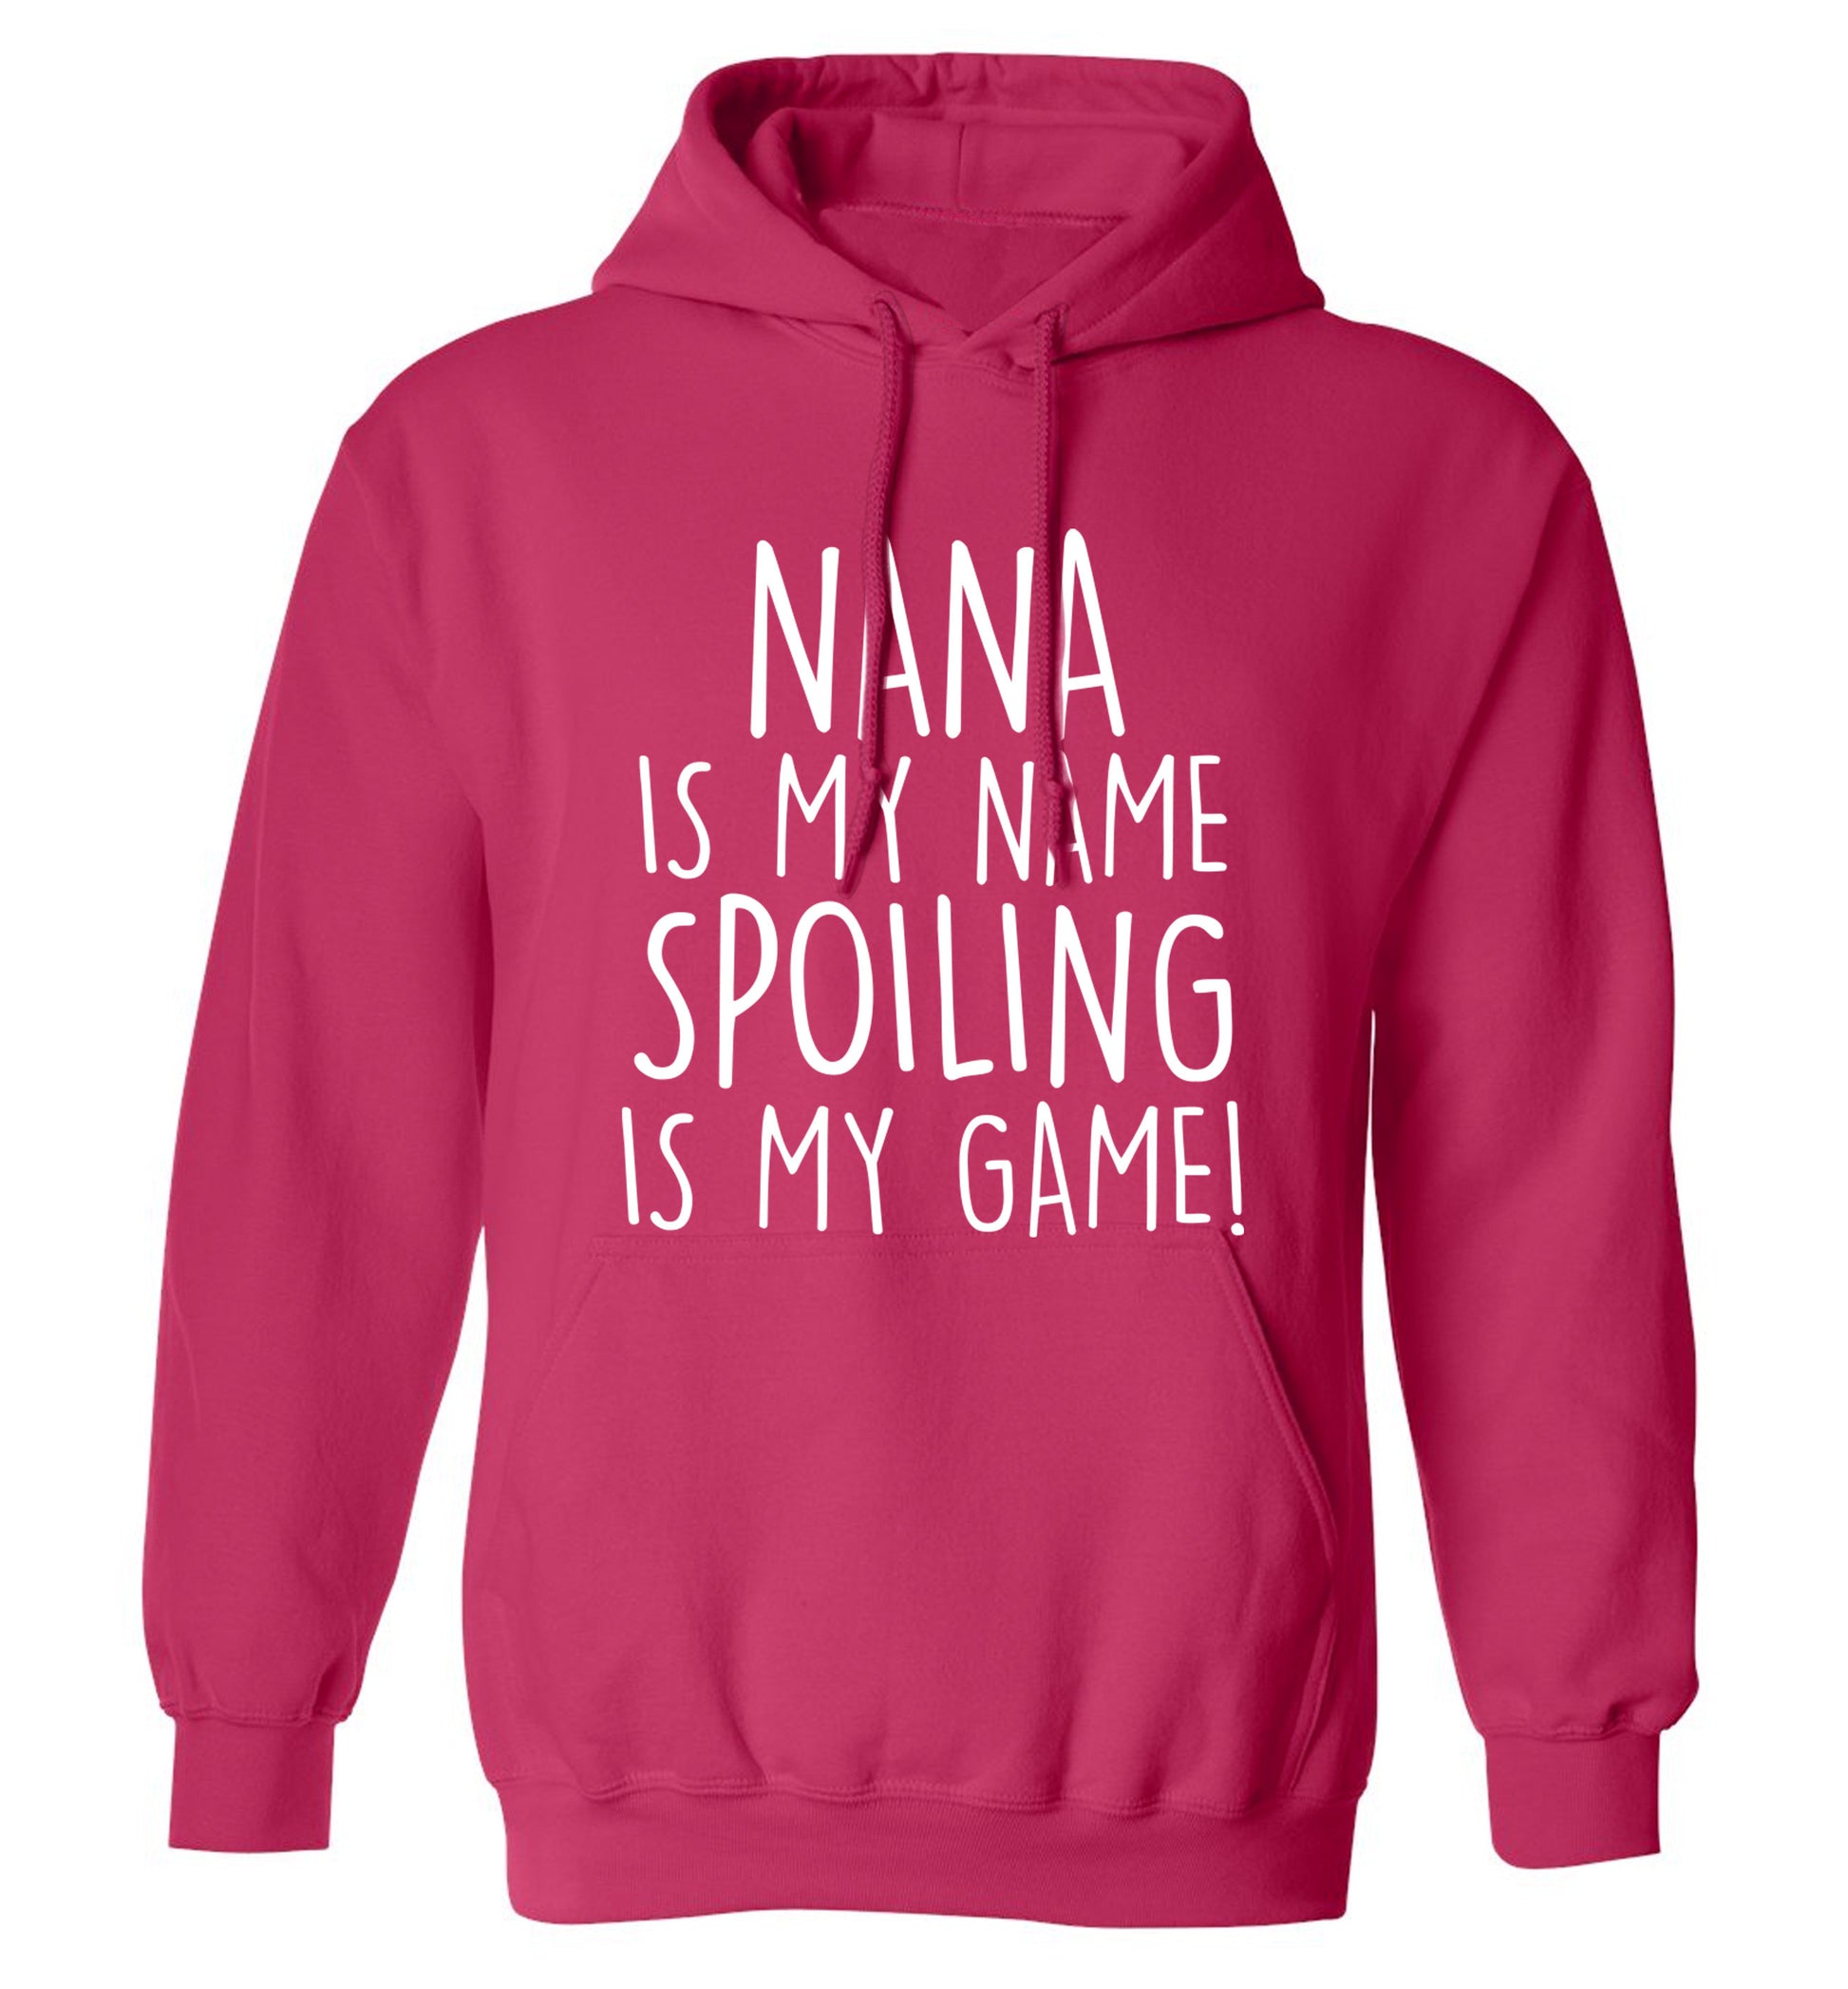 Nana is my name, spoiling is my game adults unisex pink hoodie 2XL